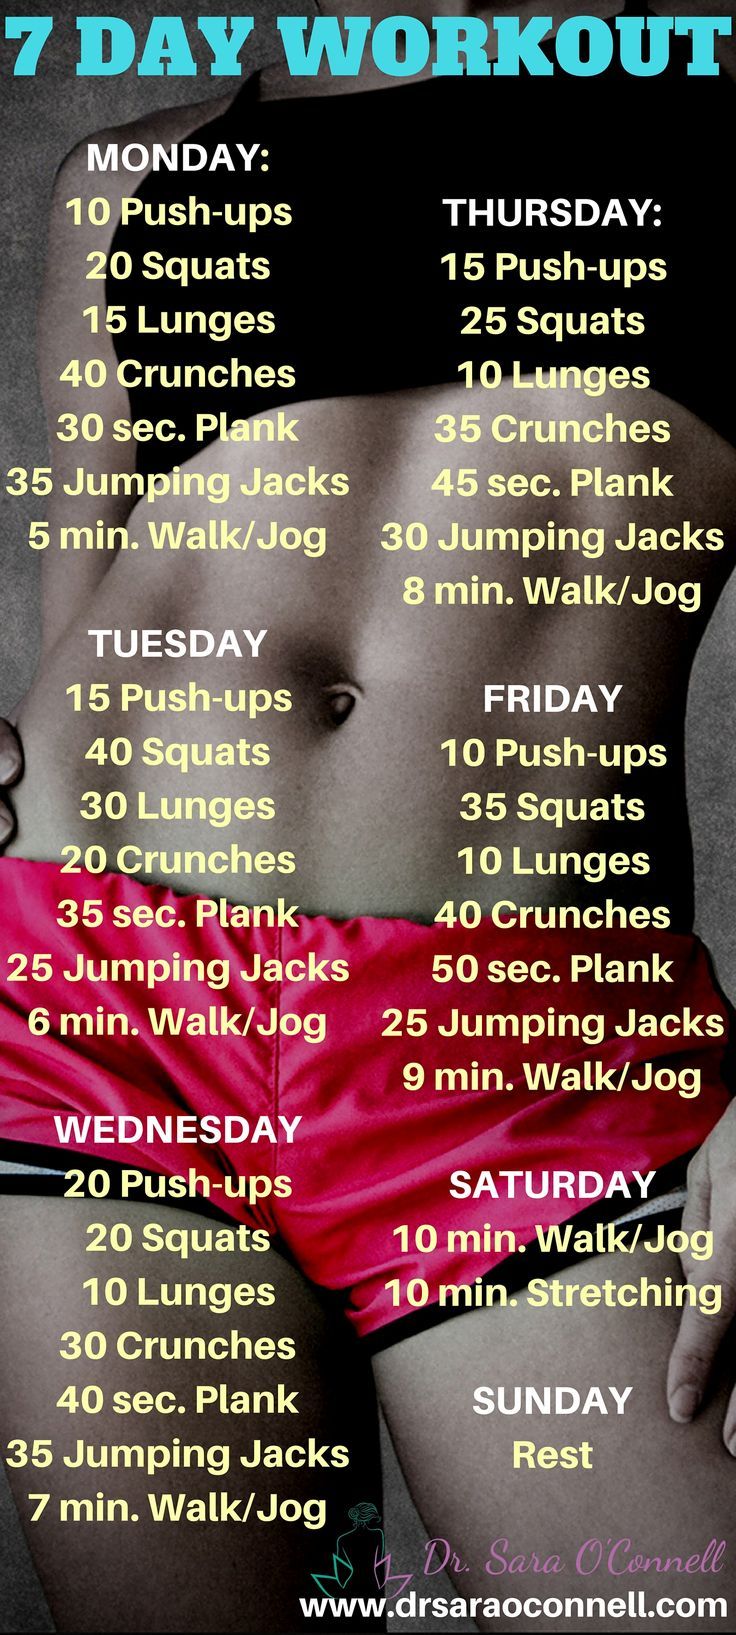 7 day workout